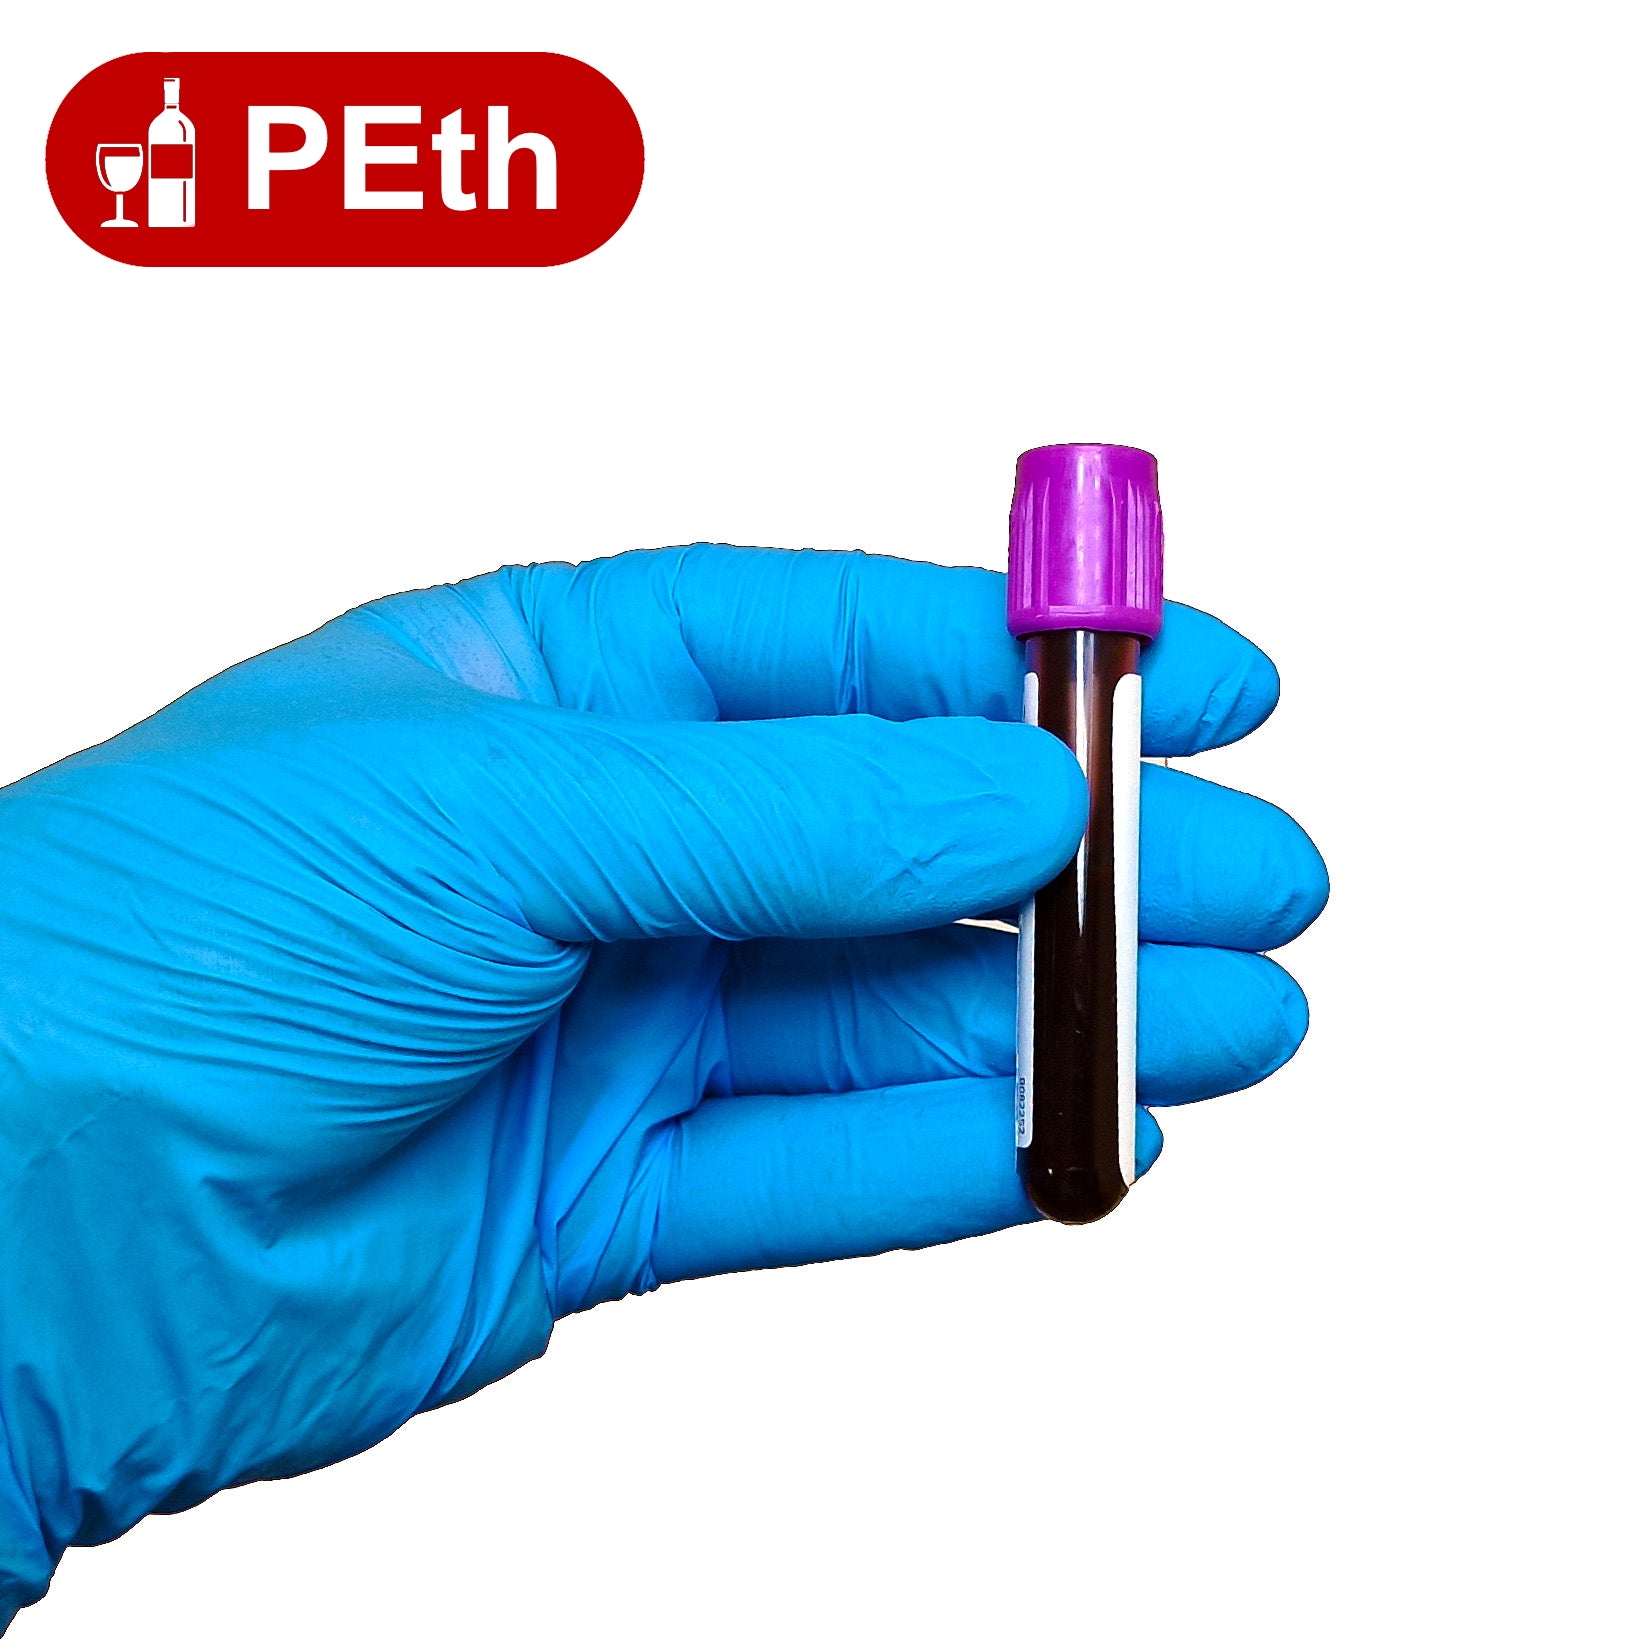 PEth Test (for alcohol misuse)